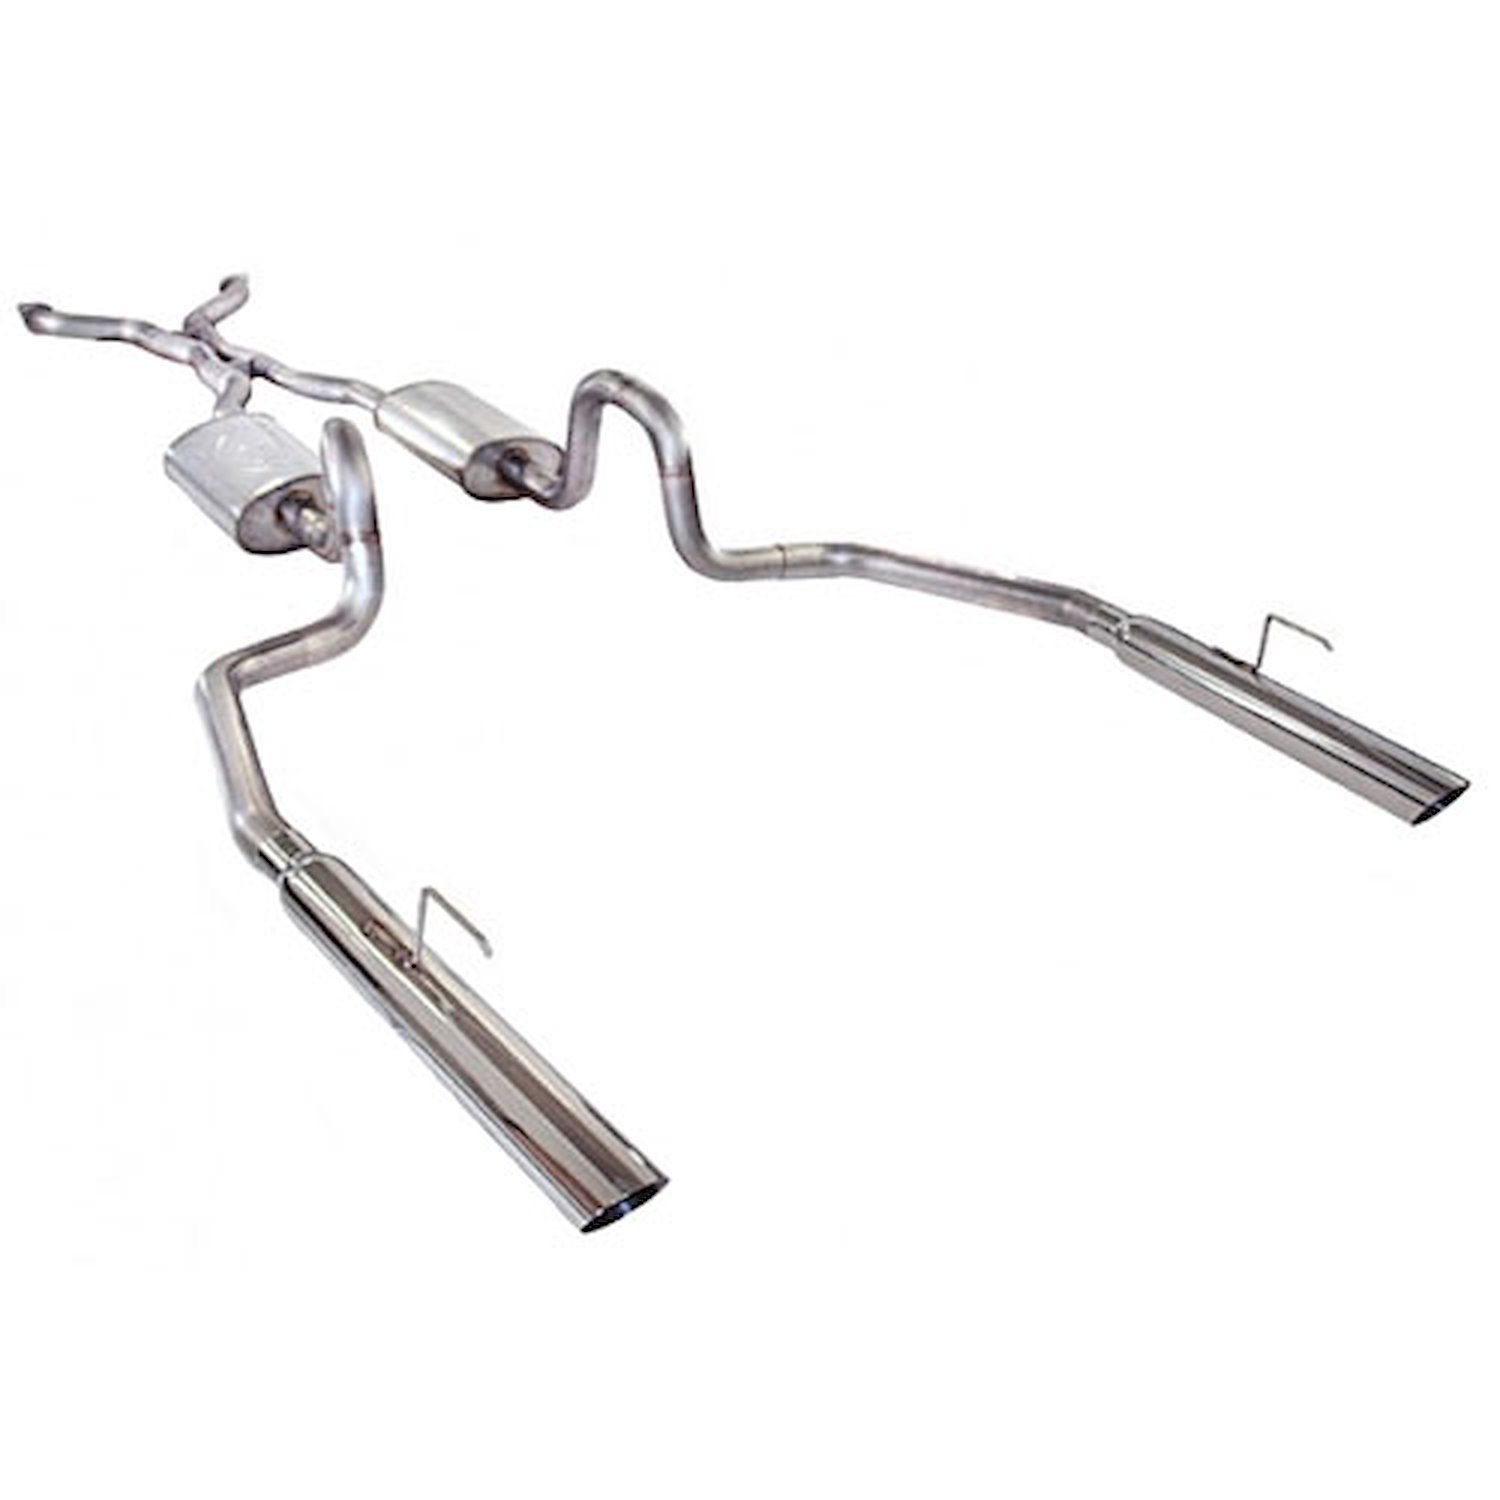 Dual Cat-Back 2 1/2 in. Exhaust System for 2003-2011 Ford Crown Victoria, Mercury Marauder 4.6L Engine